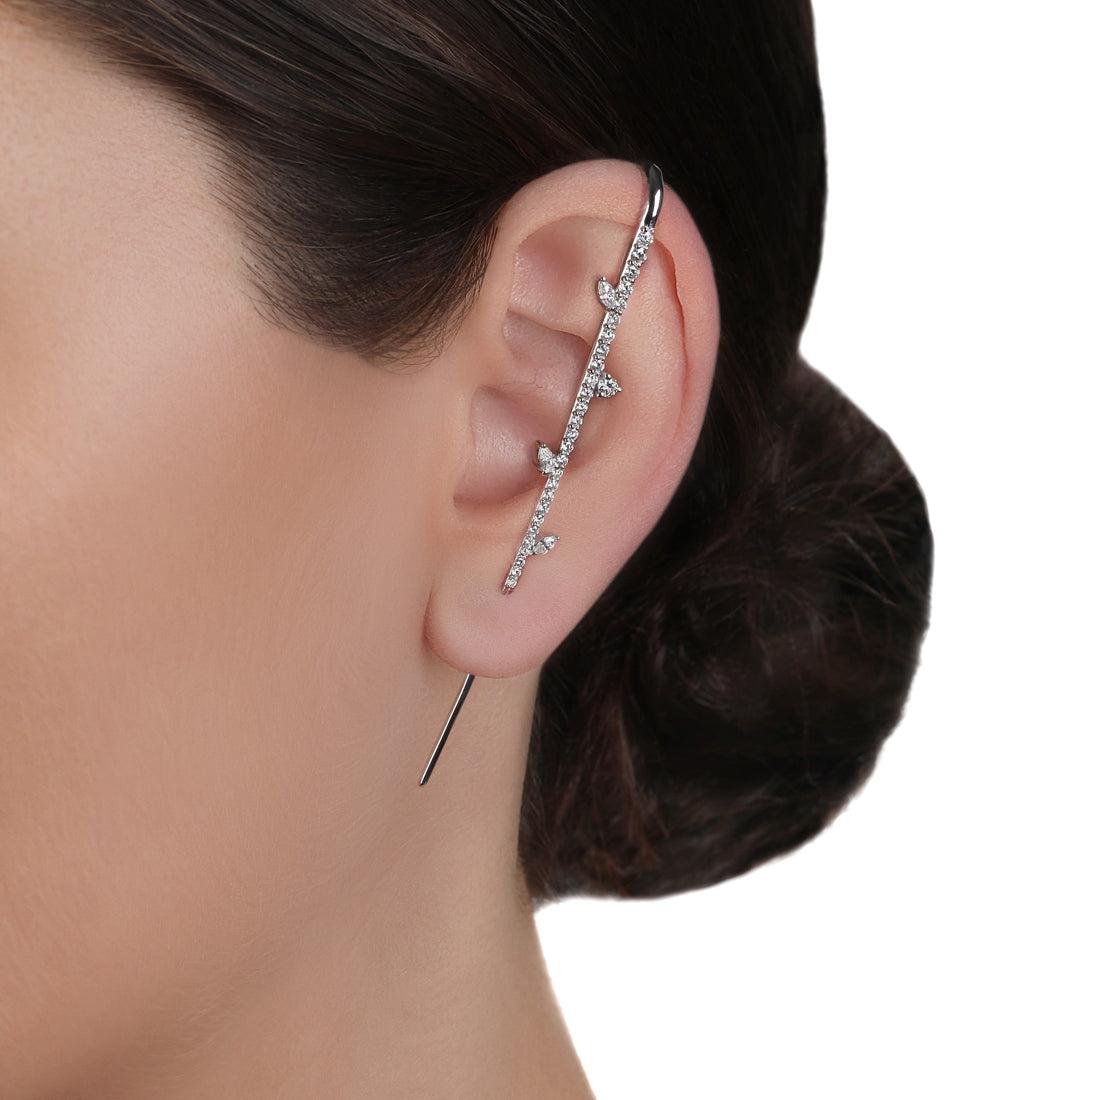 Single Side Long Thin Bar Ear Cuff Diamond Earring in 18K White Gold

0.55 Cts of Diamonds, G-H Color, VS-SI Clarity
3.4 Grams of 18K White Gold

No two products are exactly same, therefore weights are approximate.

Note that this is a Single